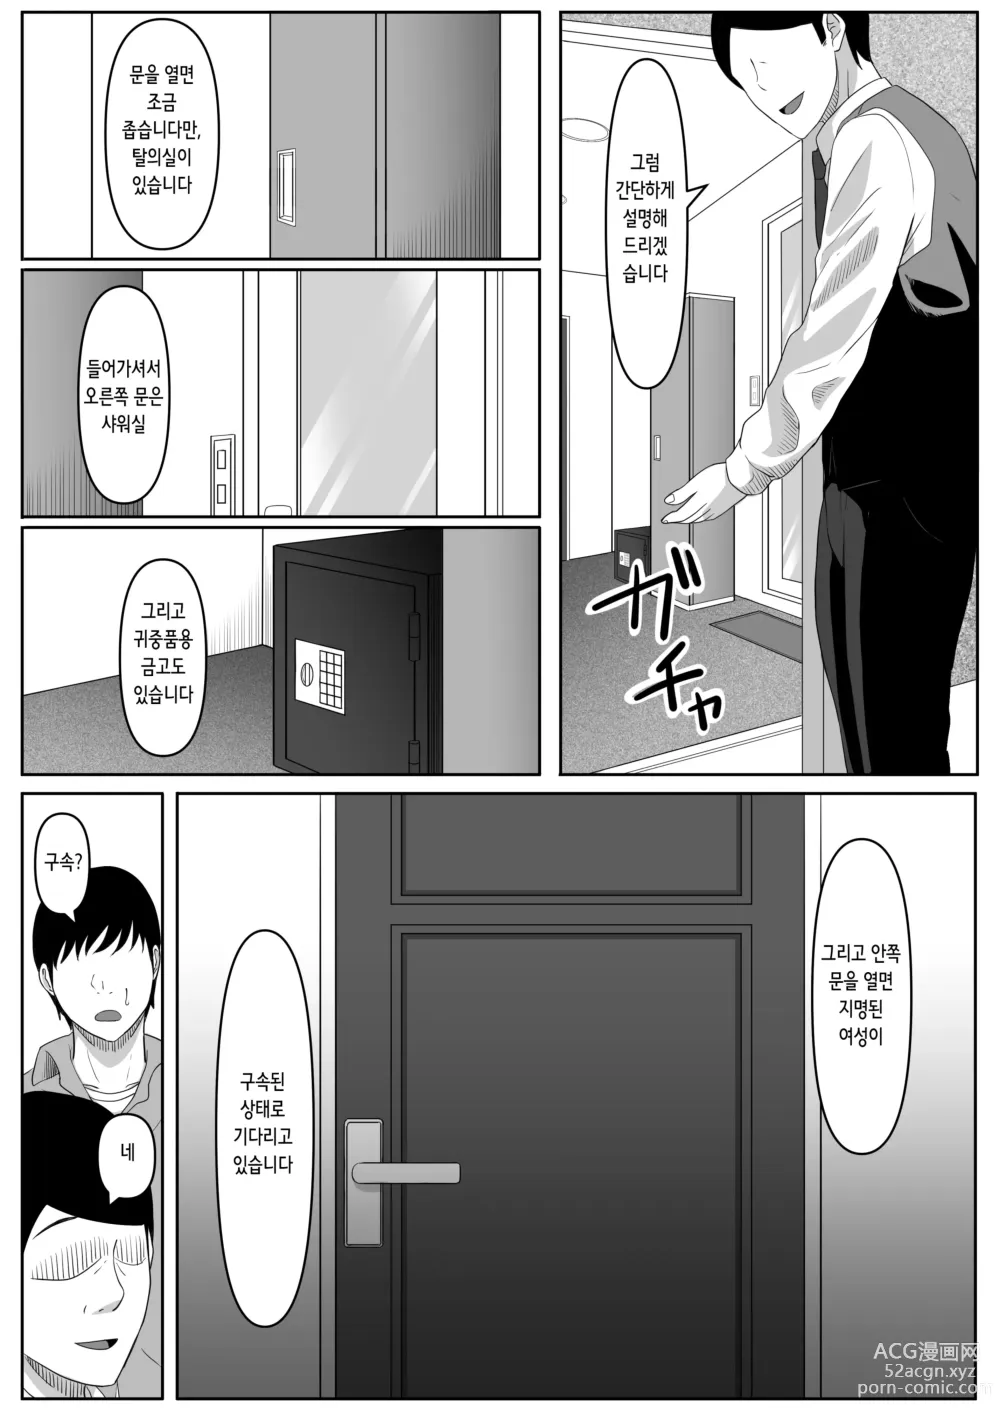 Page 12 of doujinshi 뒷구멍 변녀